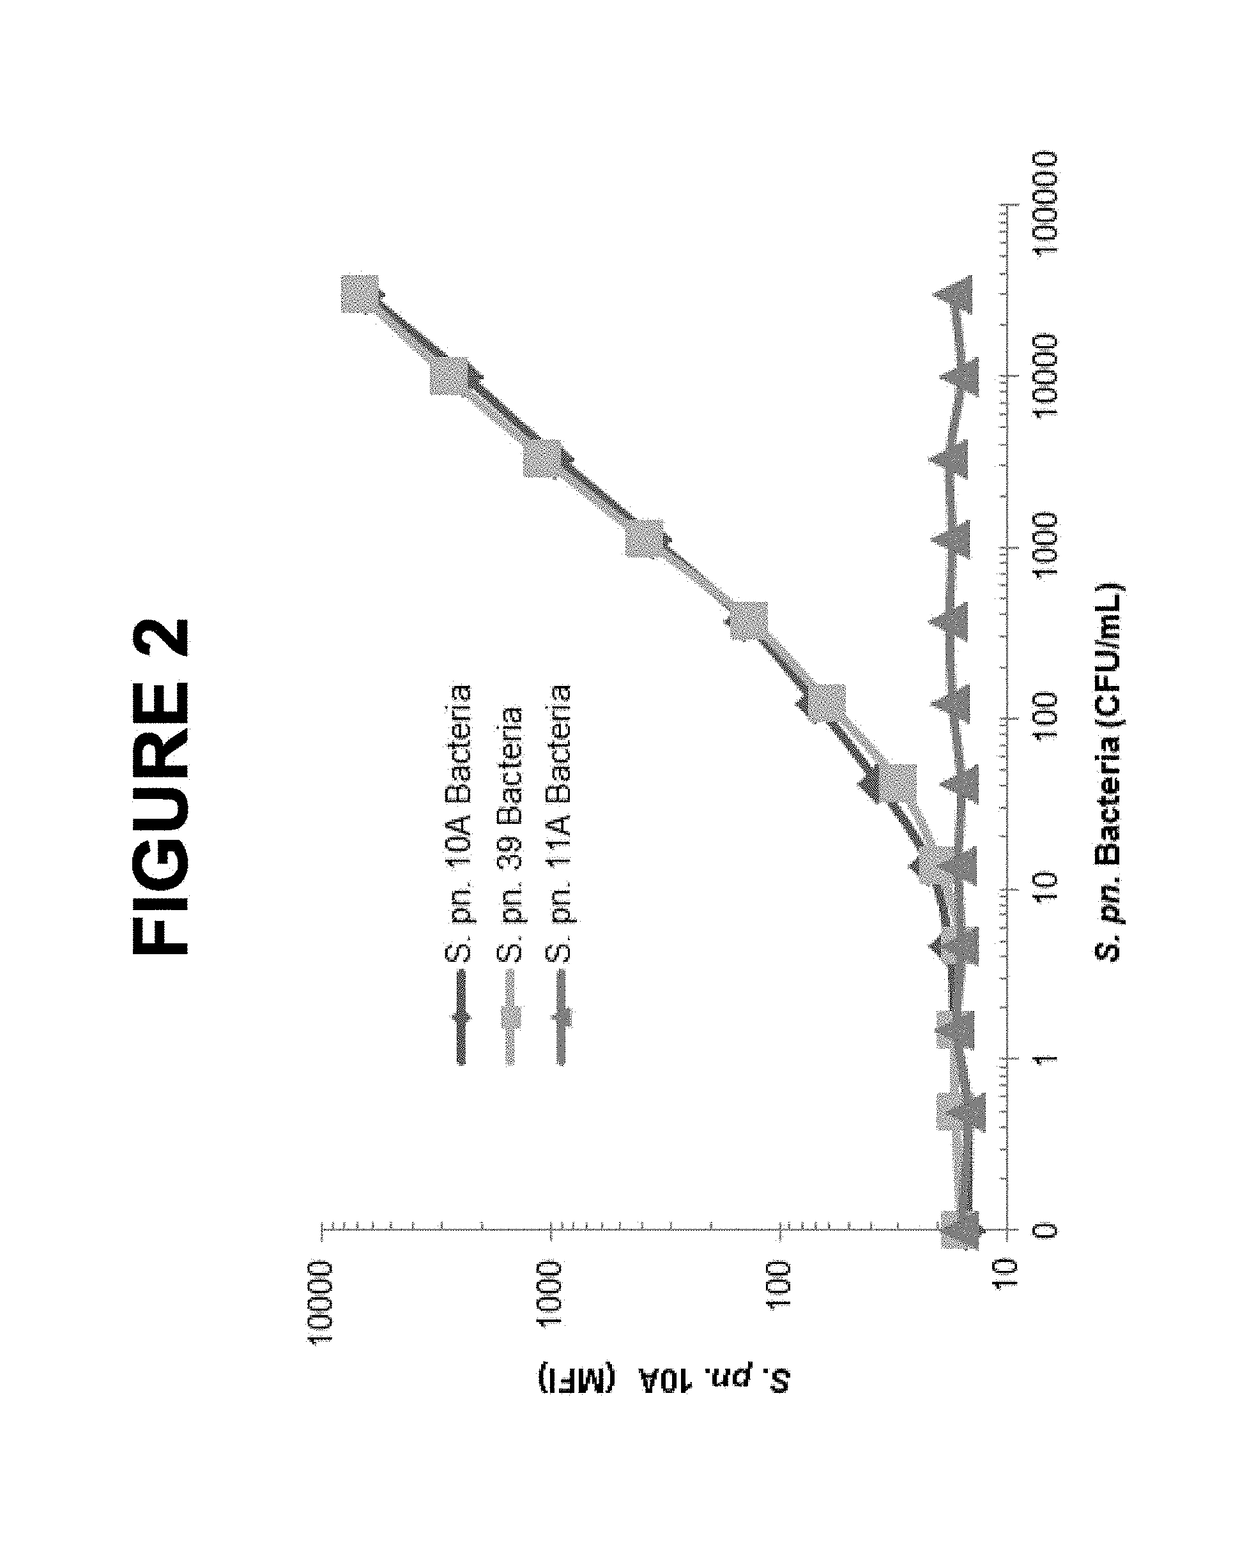 Immunogenic compositions for use in pneumococcal vaccines